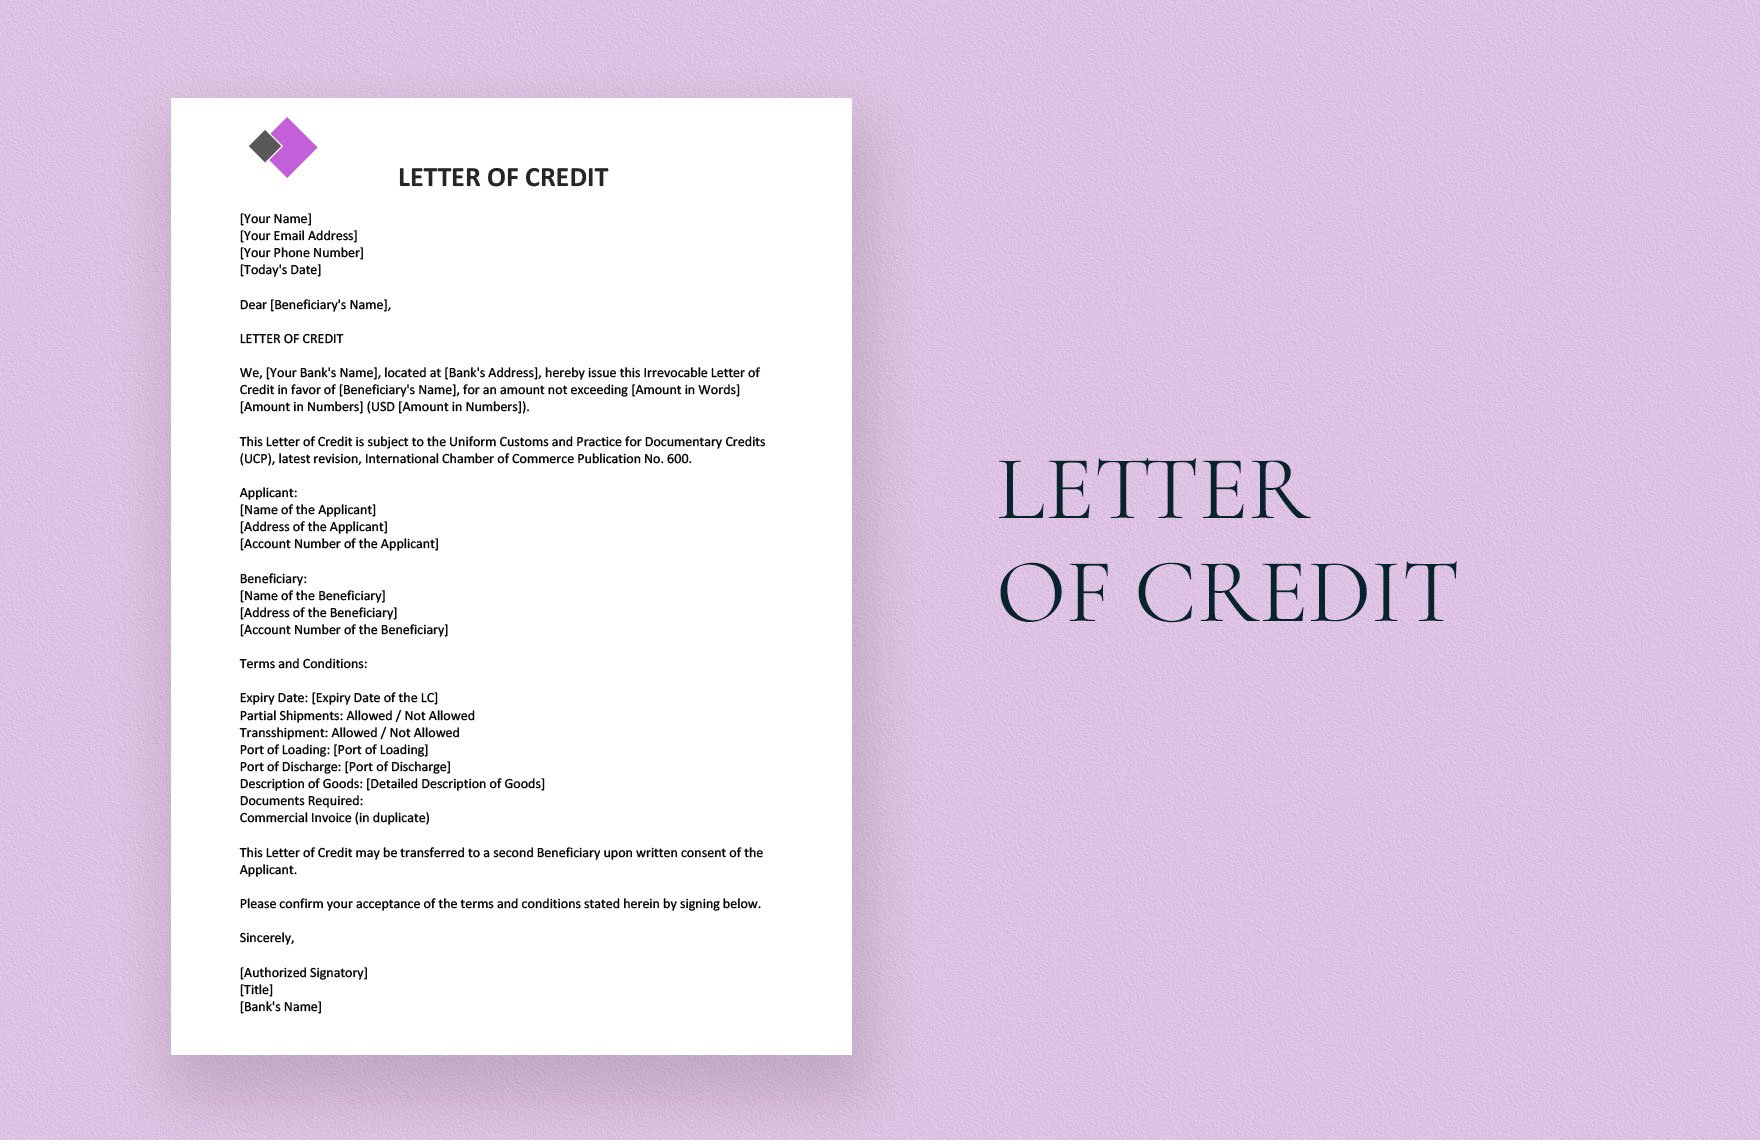 Letter of Credit in Word, Google Docs